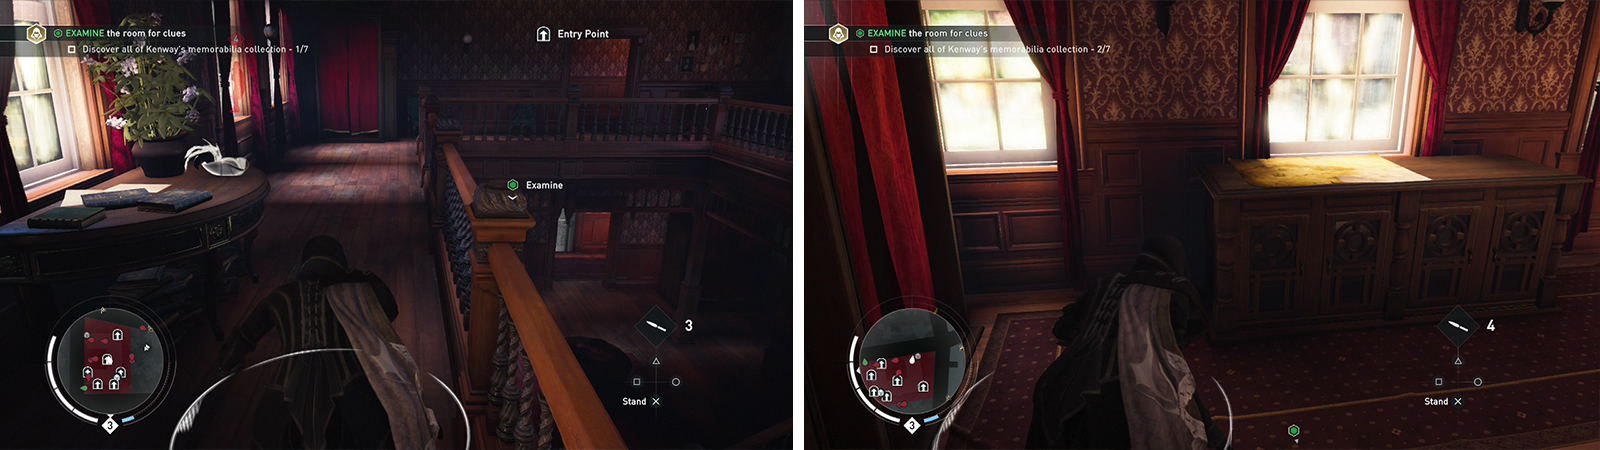 Keep an eye out for artefacts like the Pirate Hat (left) and the Map (right) as you move through the mansion.